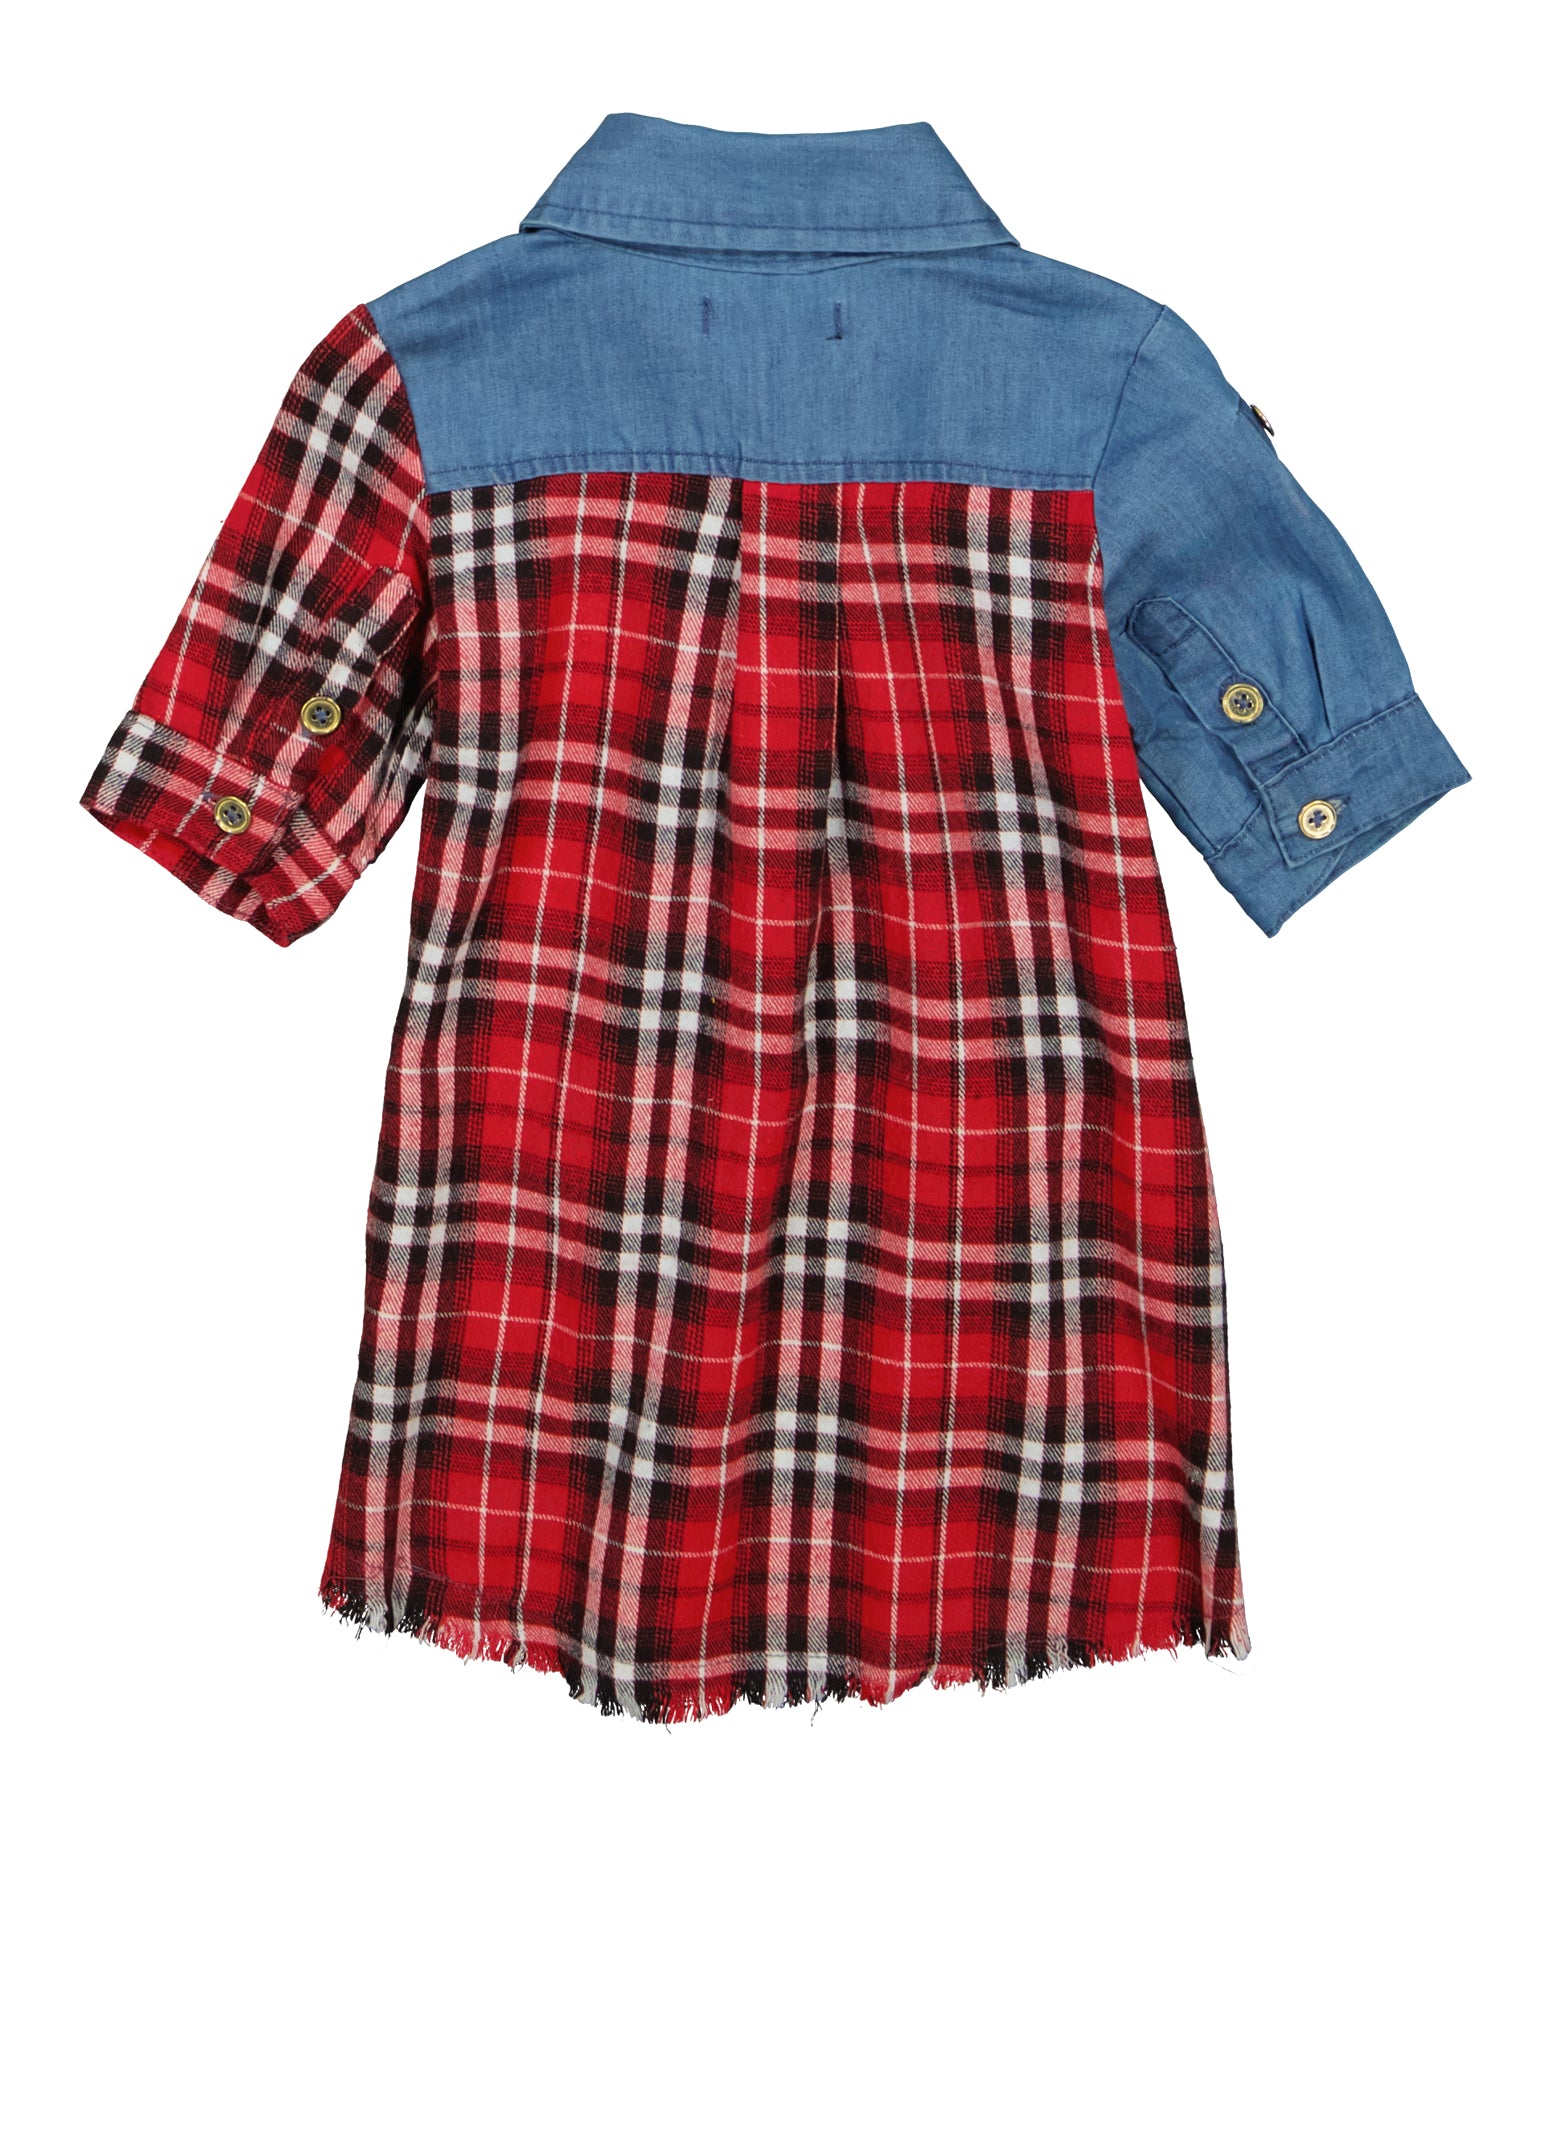 Amazon.com: Gymboree,Girls,and Toddler Embroidered Graphic Sleeveless T- Shirts,Denim,12-18 Months: Clothing, Shoes & Jewelry